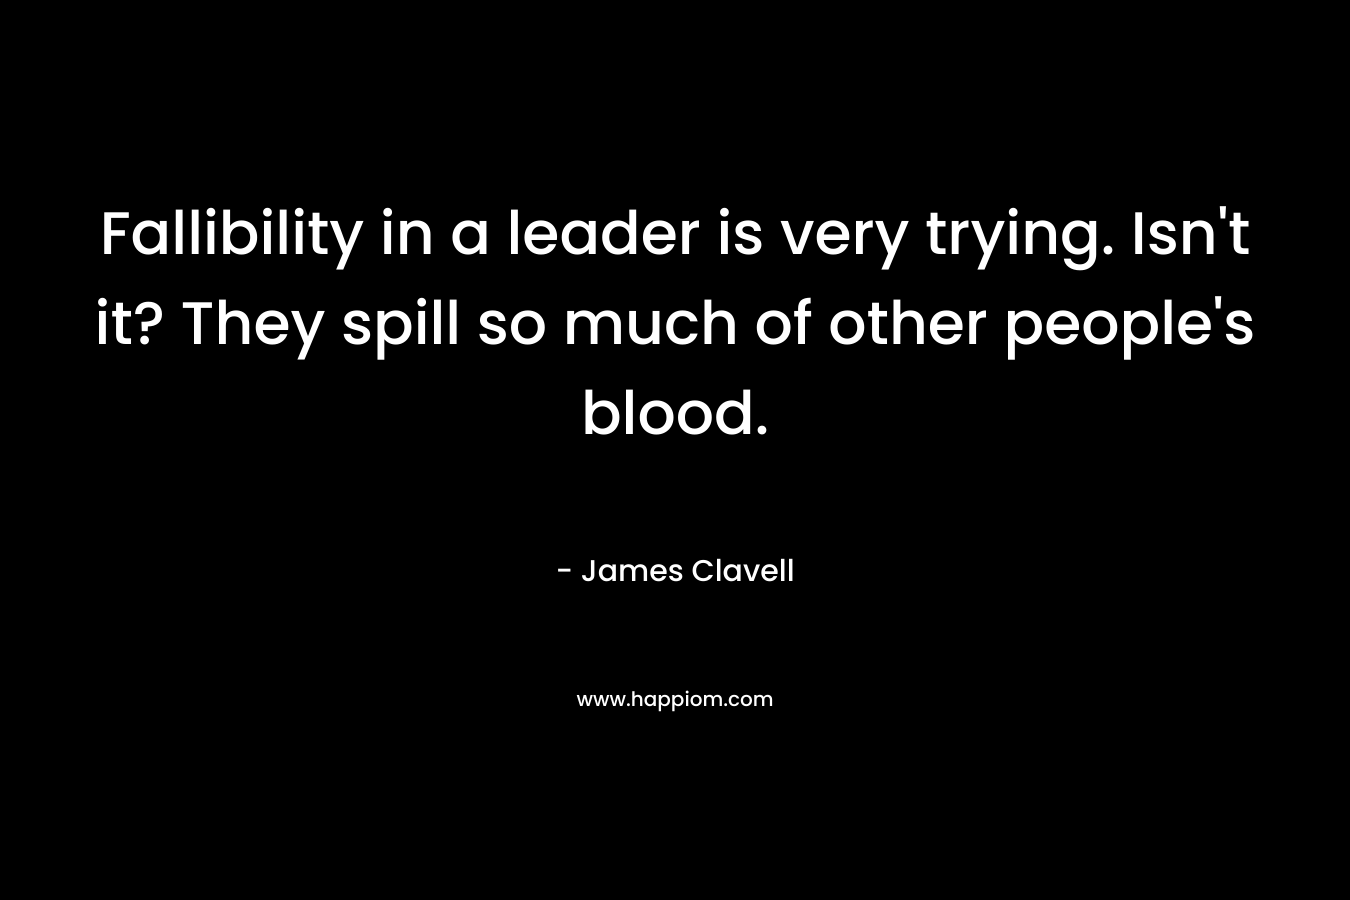 Fallibility in a leader is very trying. Isn’t it? They spill so much of other people’s blood. – James Clavell